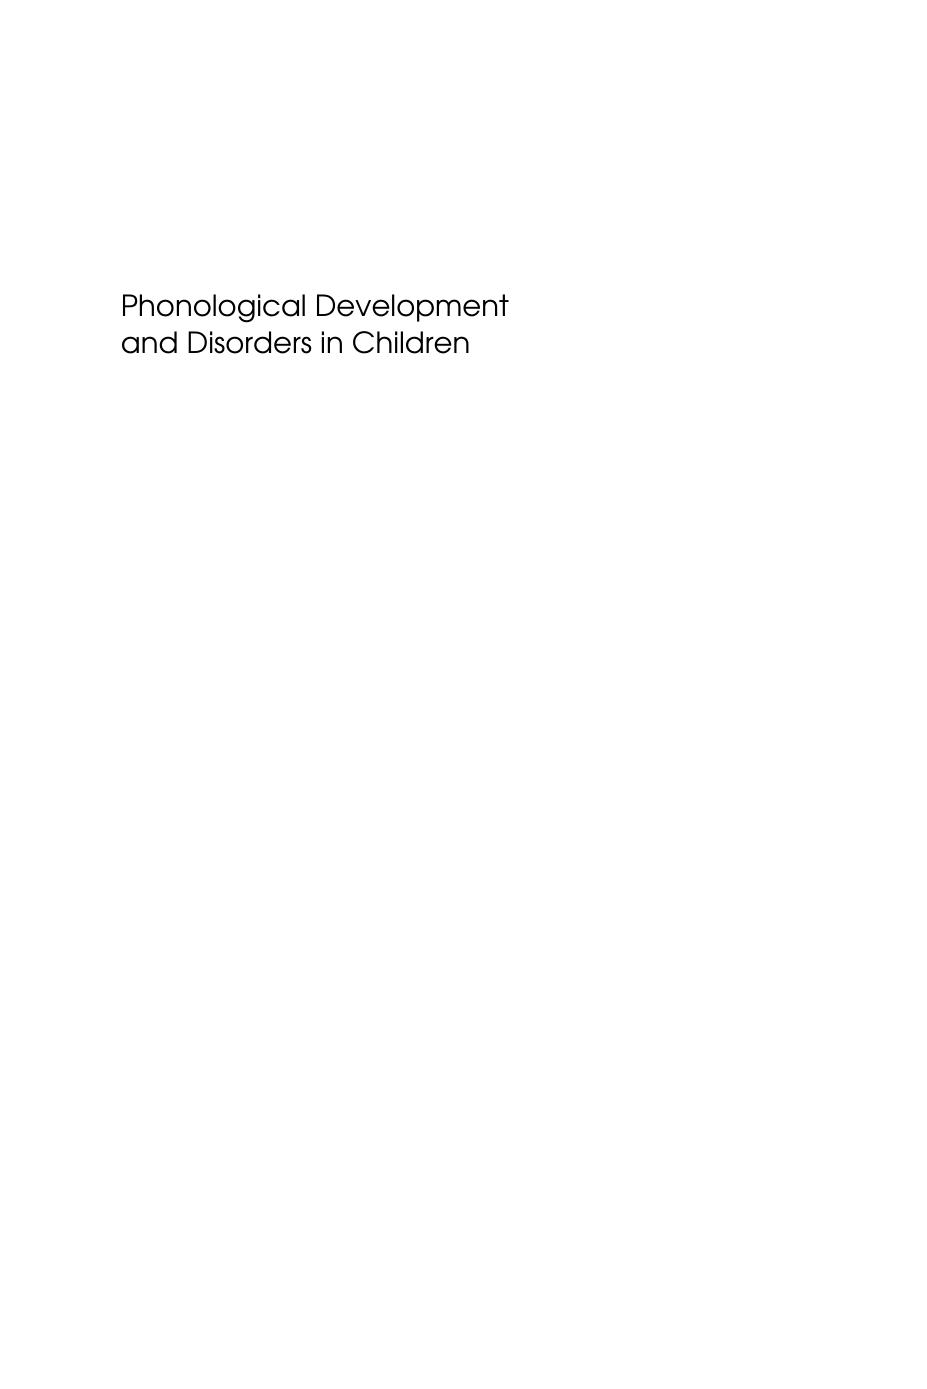 Phonological Development and Disorders in Children : A Multilingual Perspective by Zhu Hua; Barbara Dodd